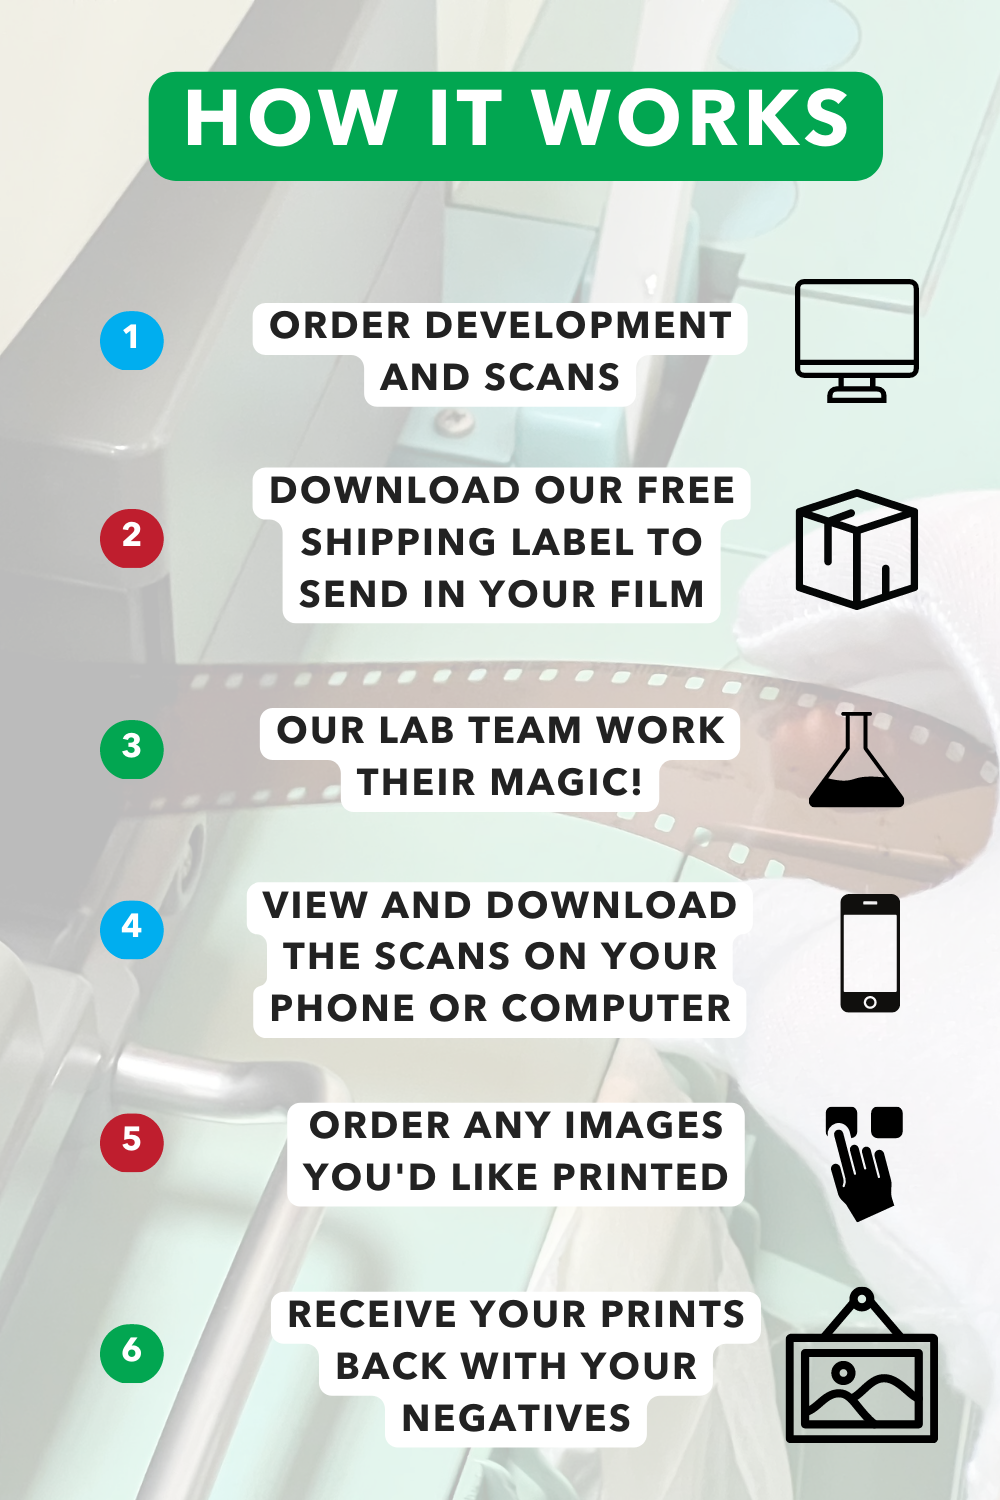 How to develop your film with our film lab